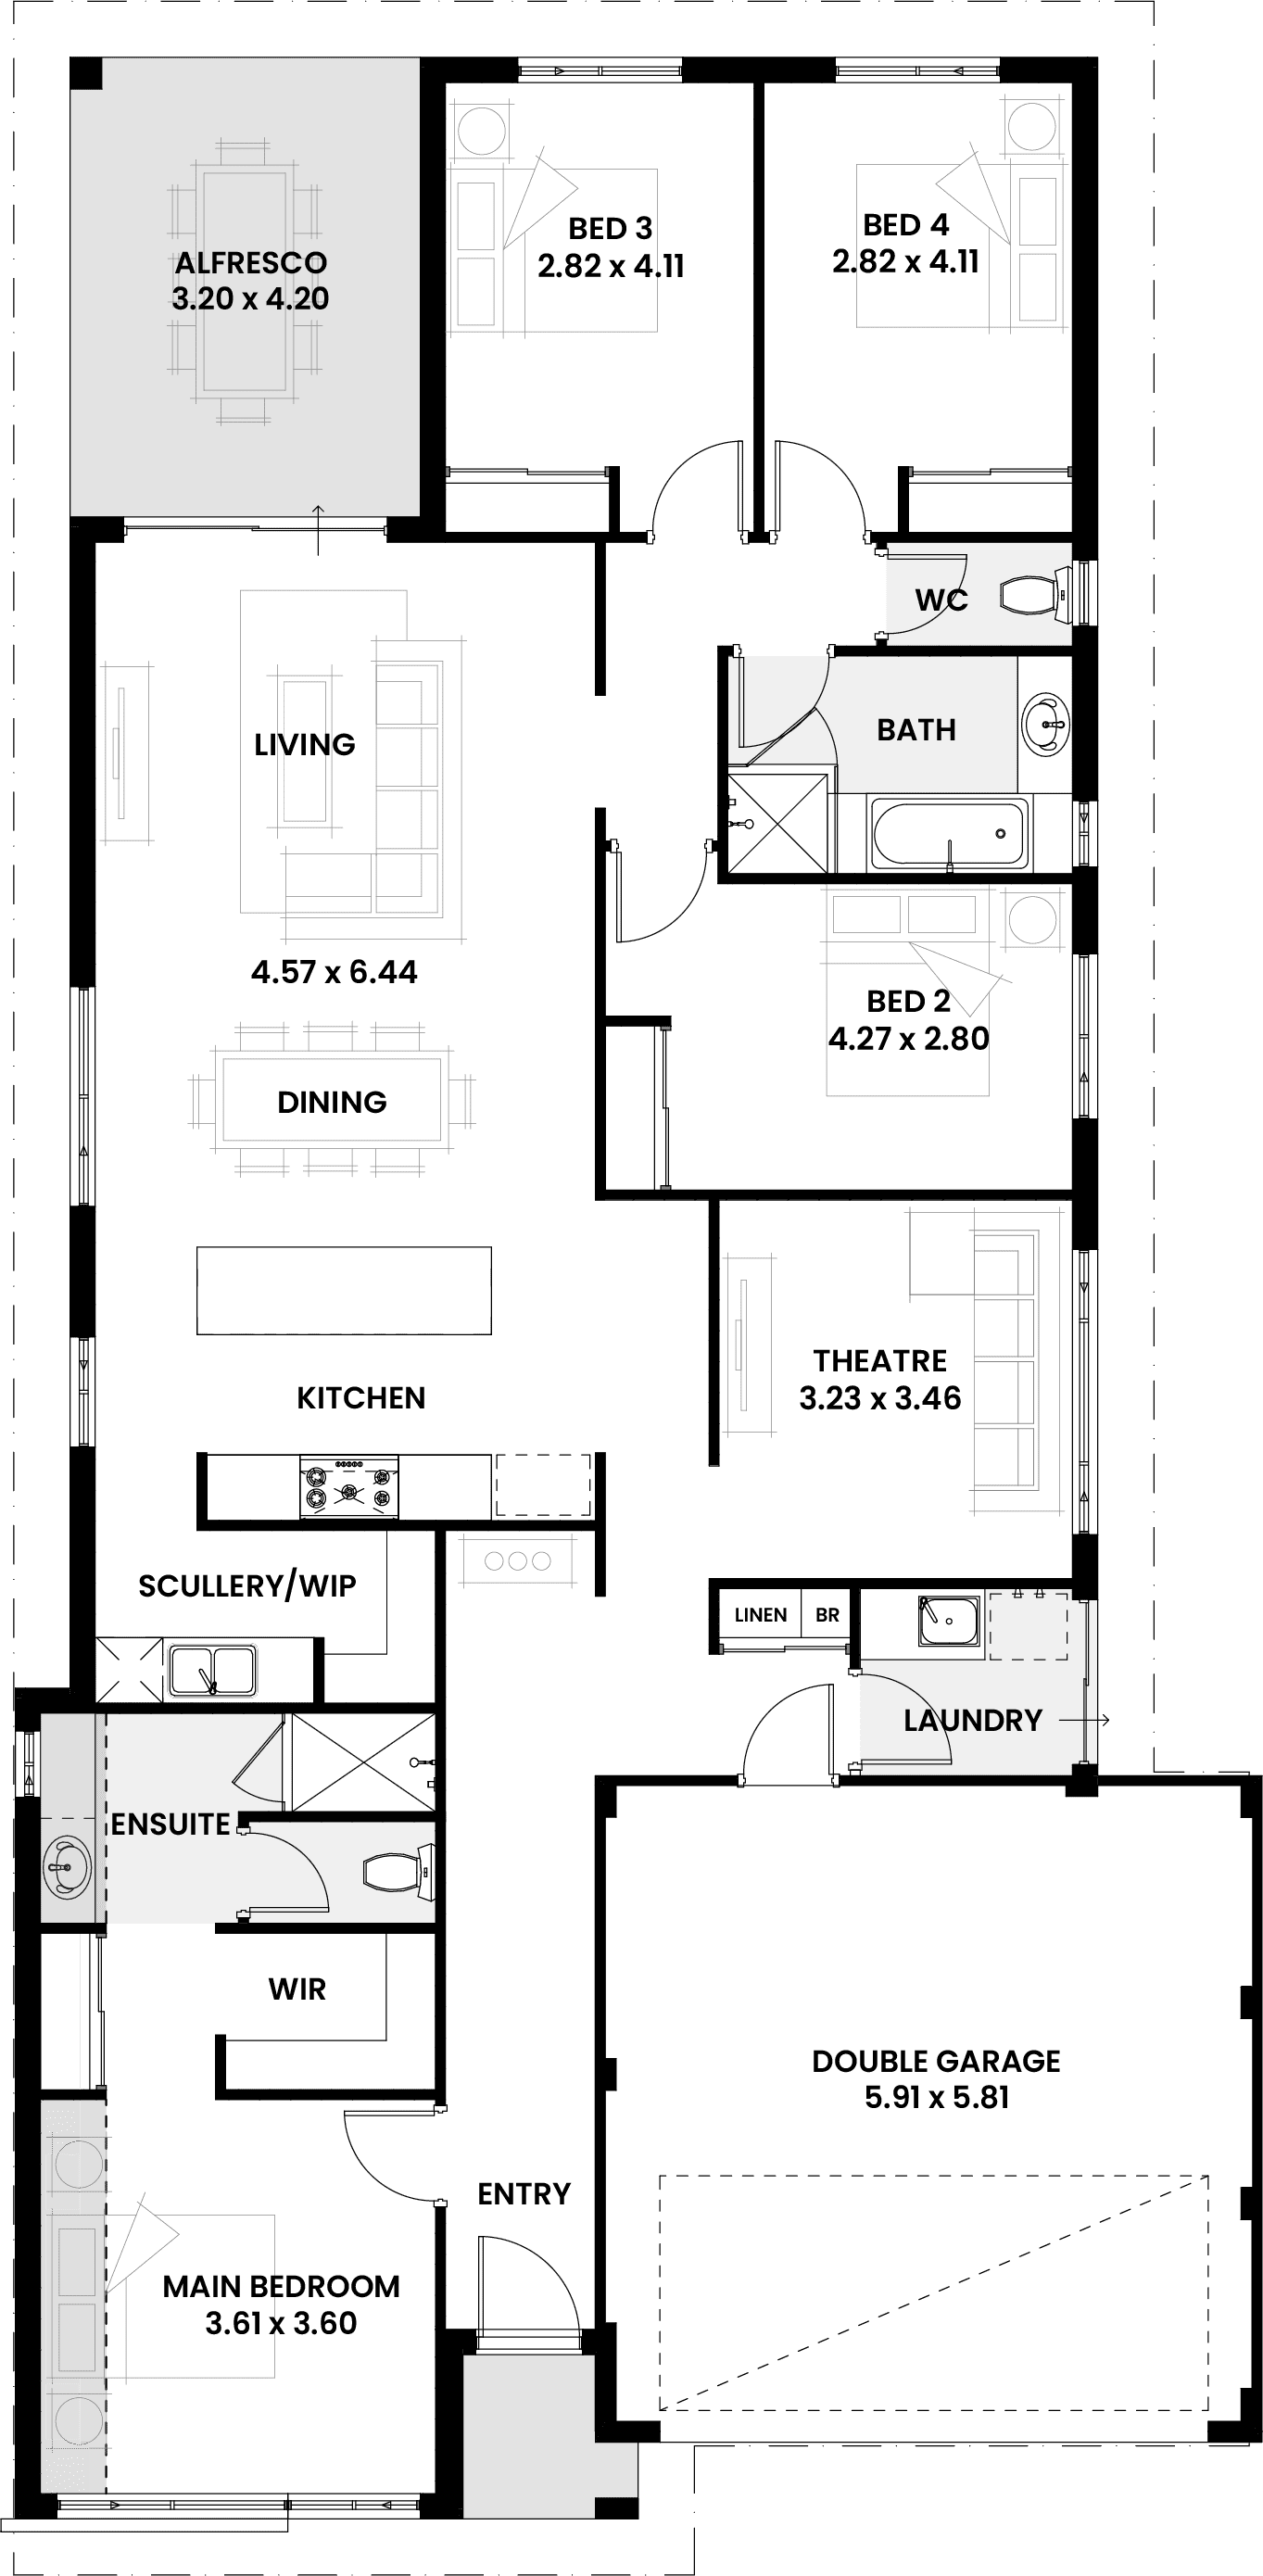 Floorplan for The Alpine, a Move Homes new home design perfect for first time buyers and new builders in Perth